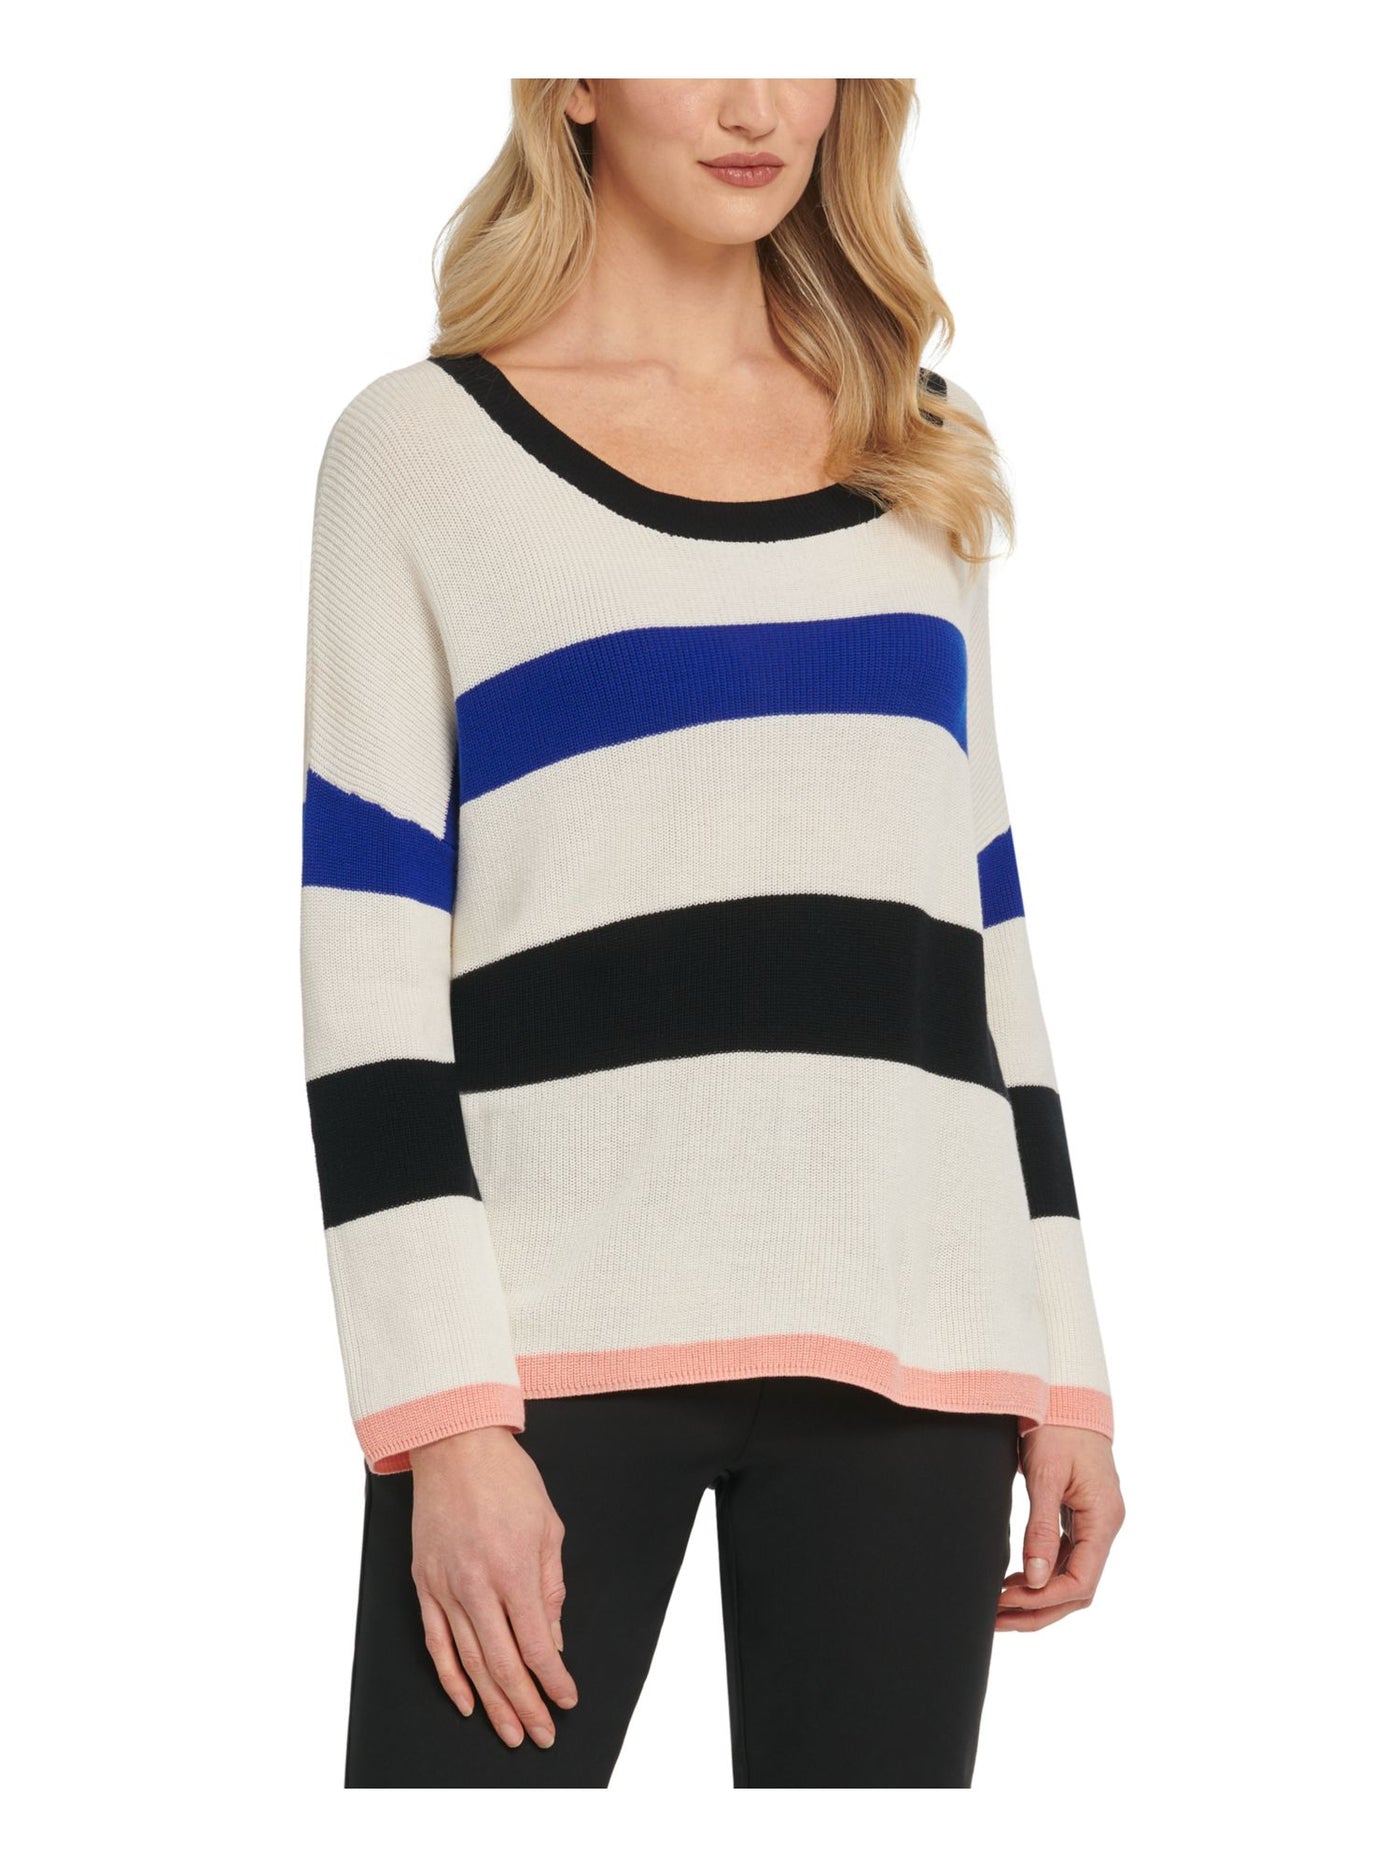 DKNY Womens White Ribbed Color Block Long Sleeve Scoop Neck Sweater XS